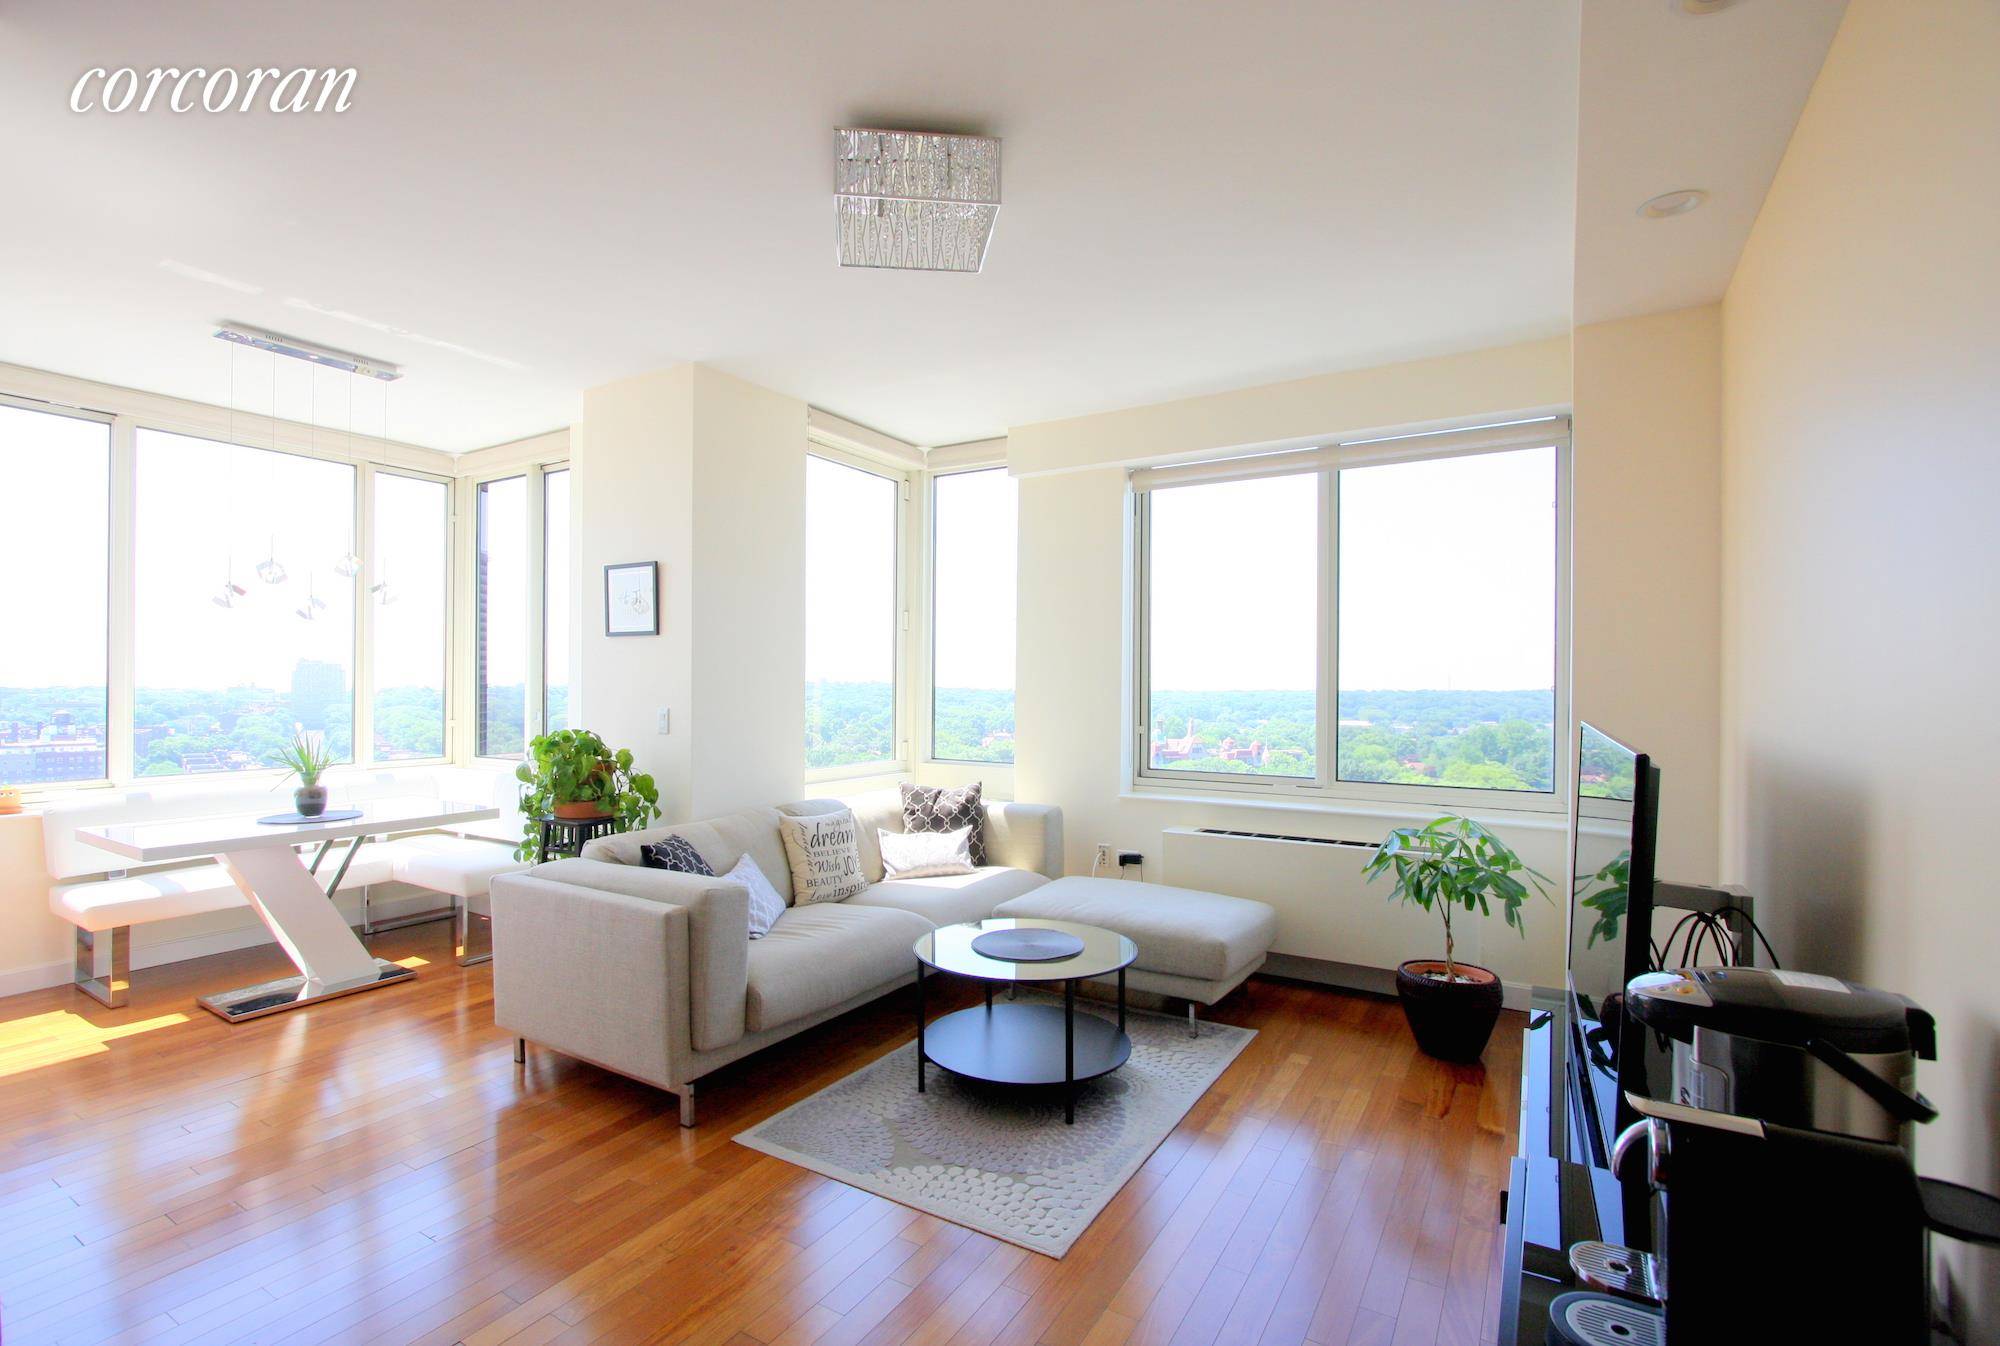 Sunny, luxury and Beautiful 2BR 2 Bath at Prime Location in Forest Hills, this newly renovated lovely Penthouse home has 2 Exposures and amazing views, located in a full service ...